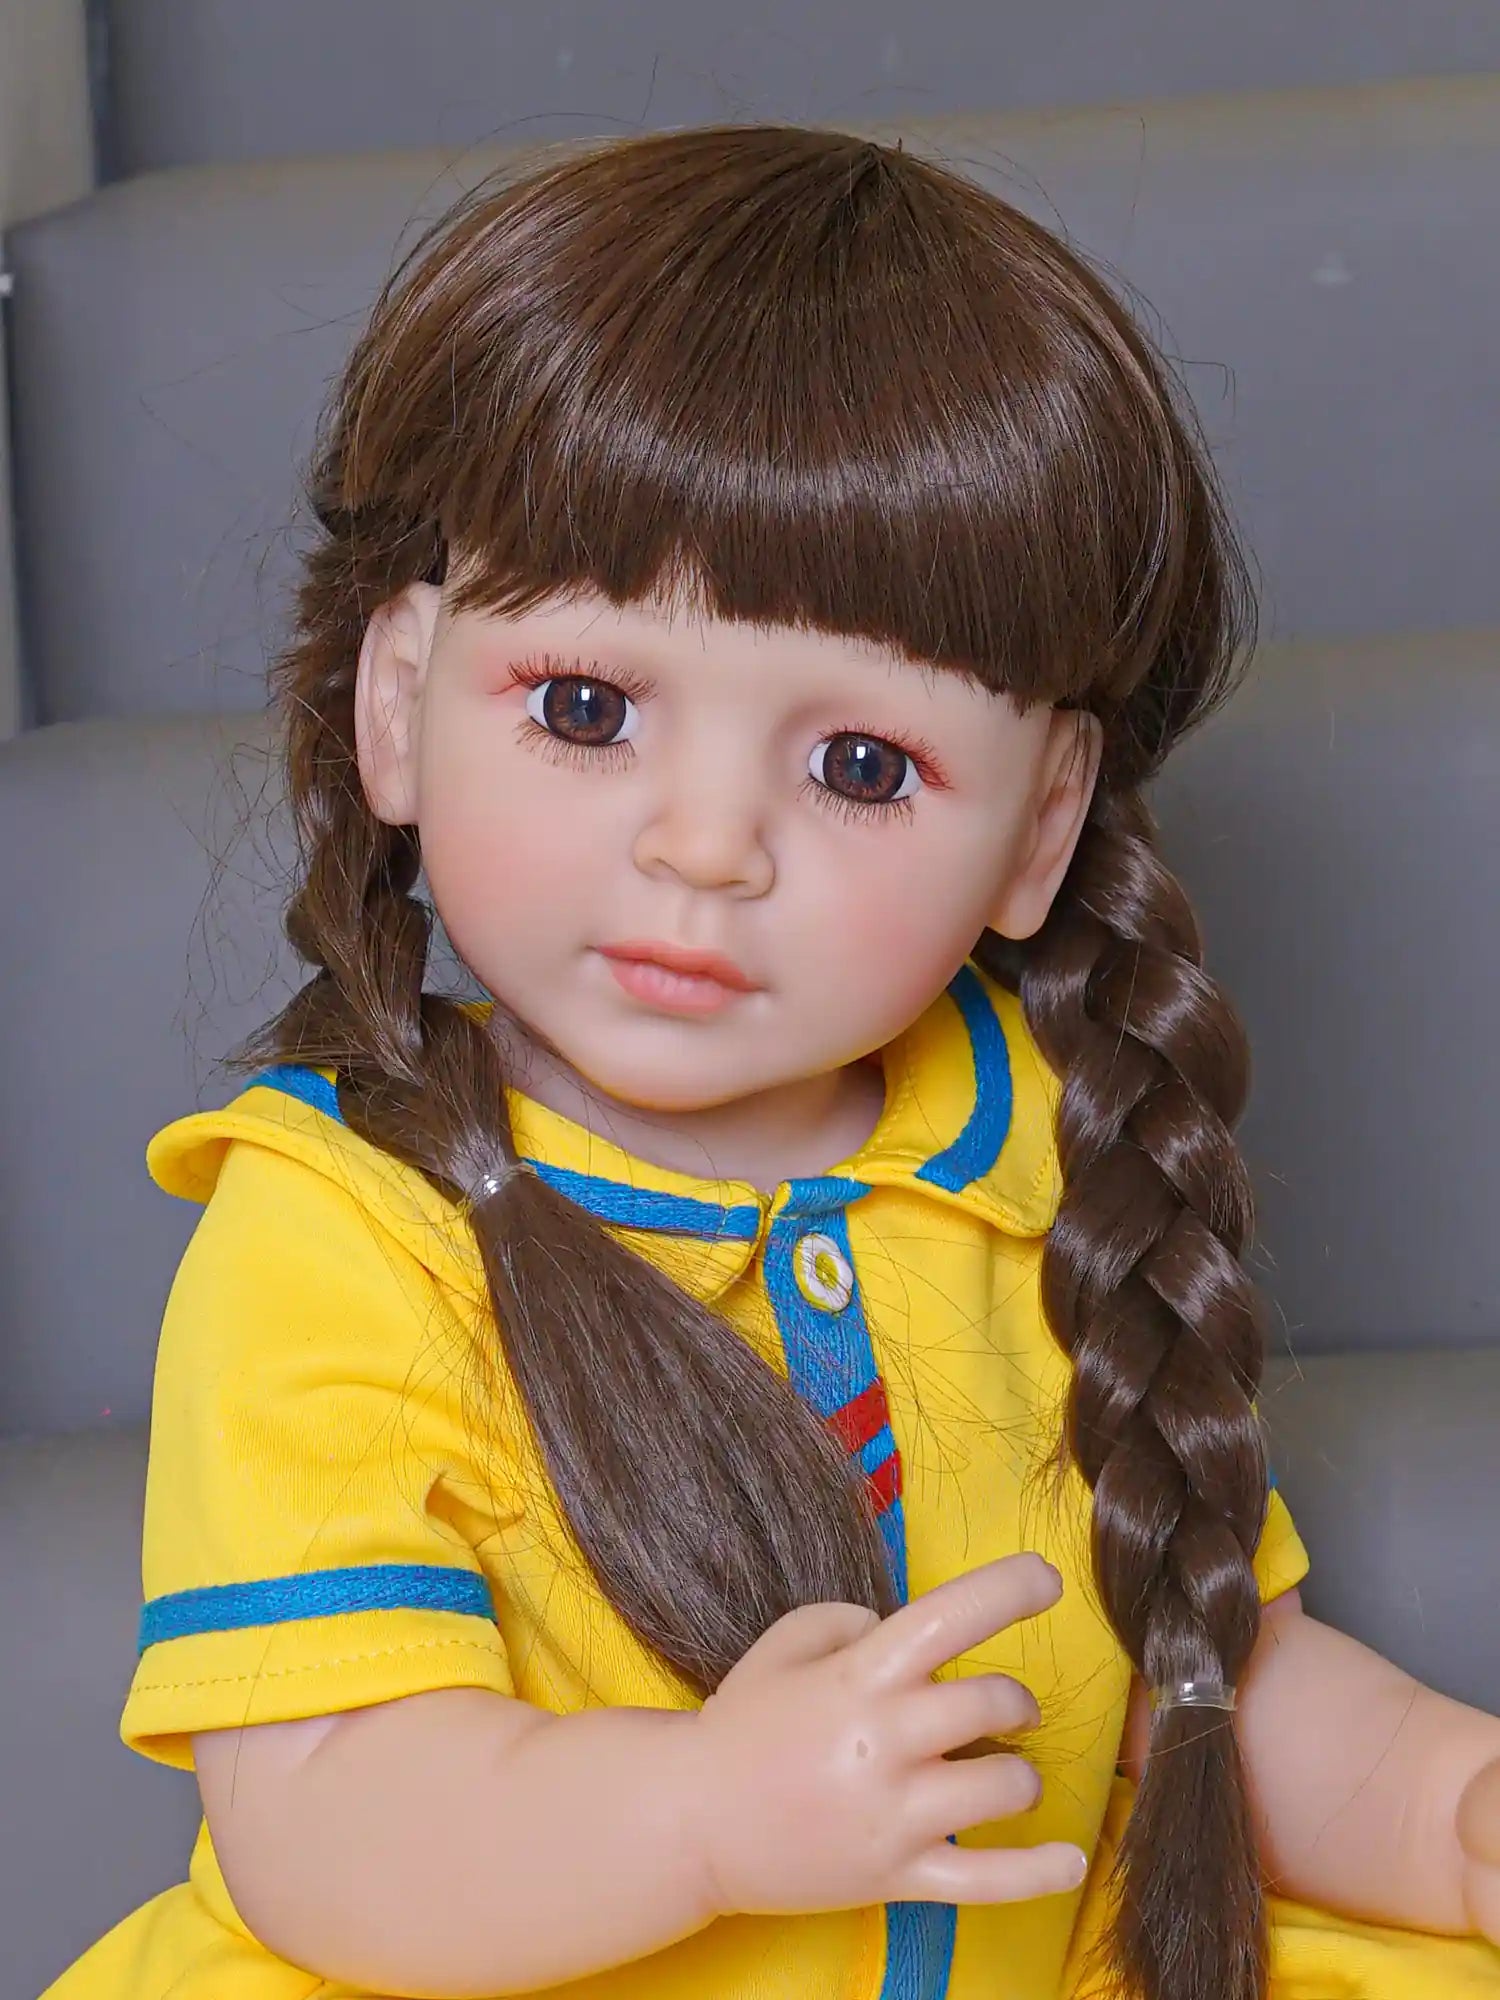 Realistic doll with braided locks and an observant expression, clad in a vibrant yellow outfit, inside a modern playroom.